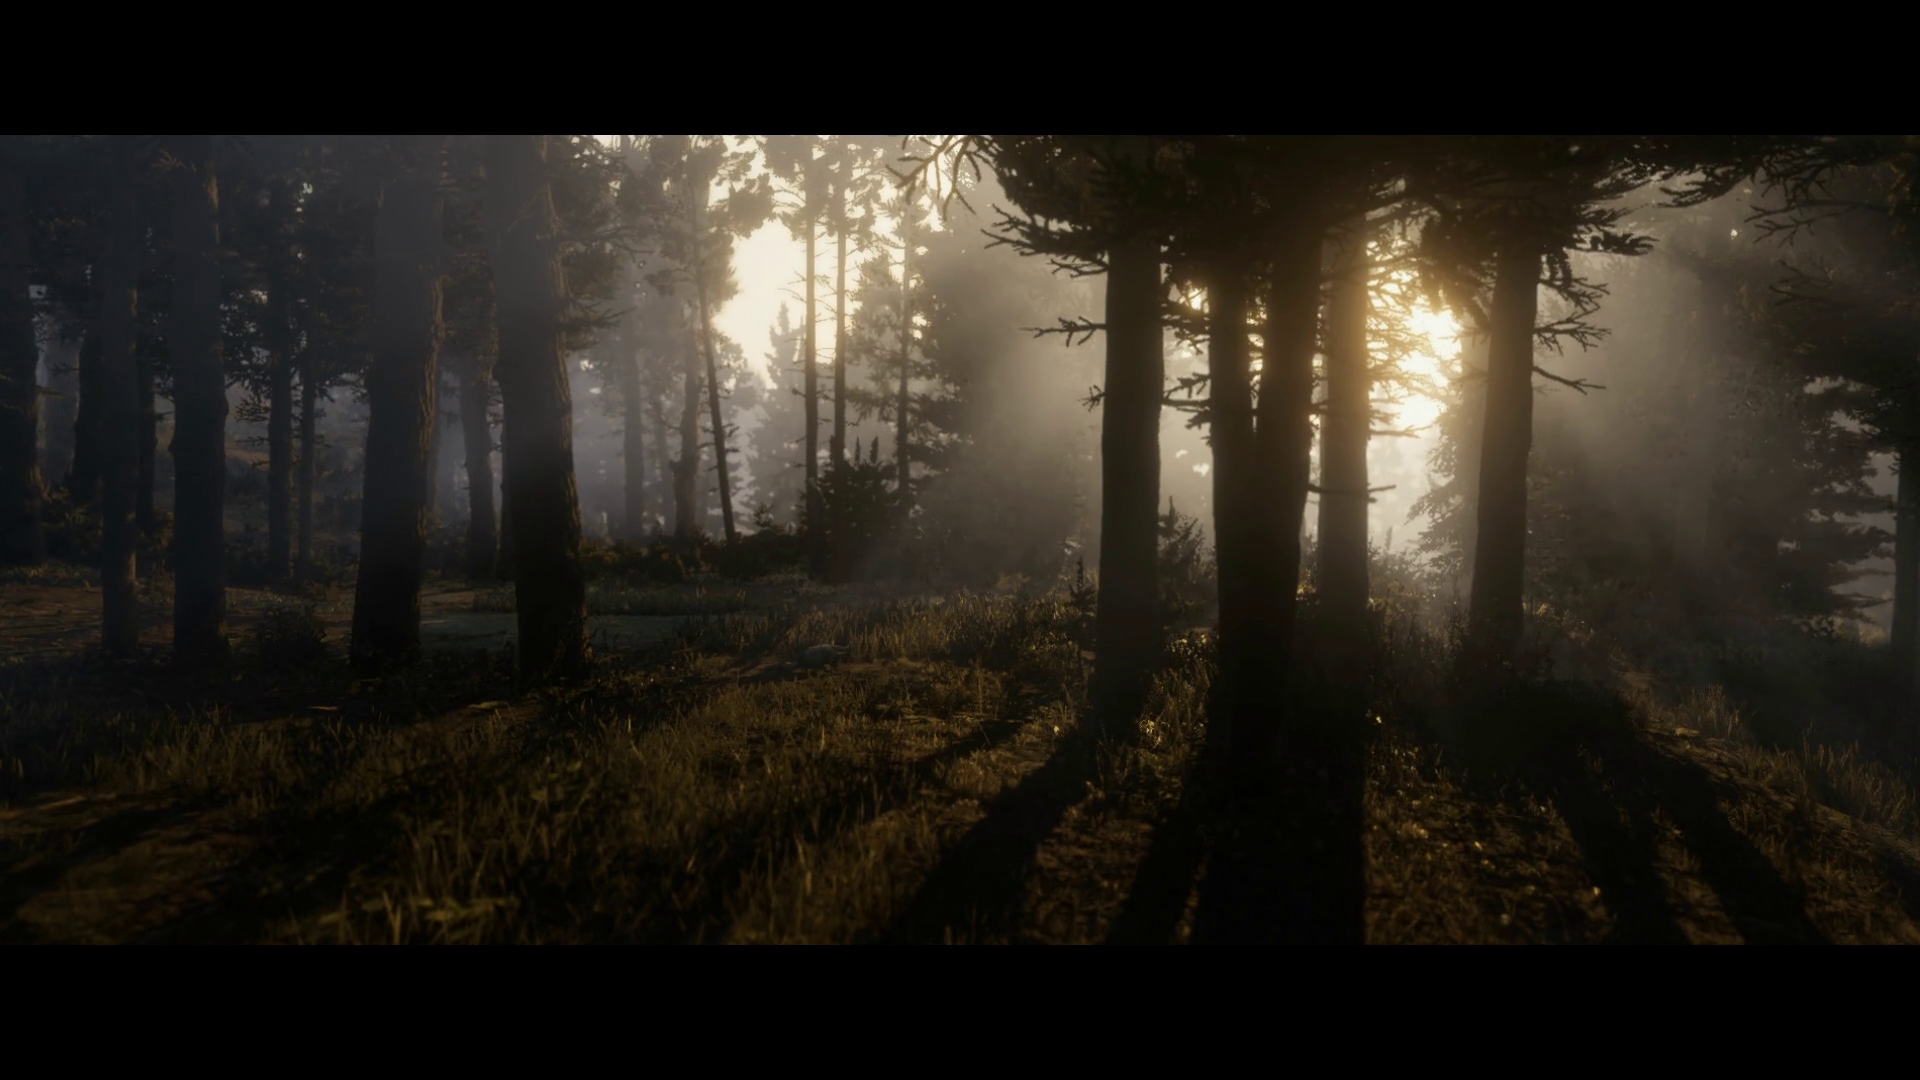 http://www.rdrvision.com/images/content/red-dead-redemption-2/trailer_1/red-dead-redemption-2_trailer-1_04.png